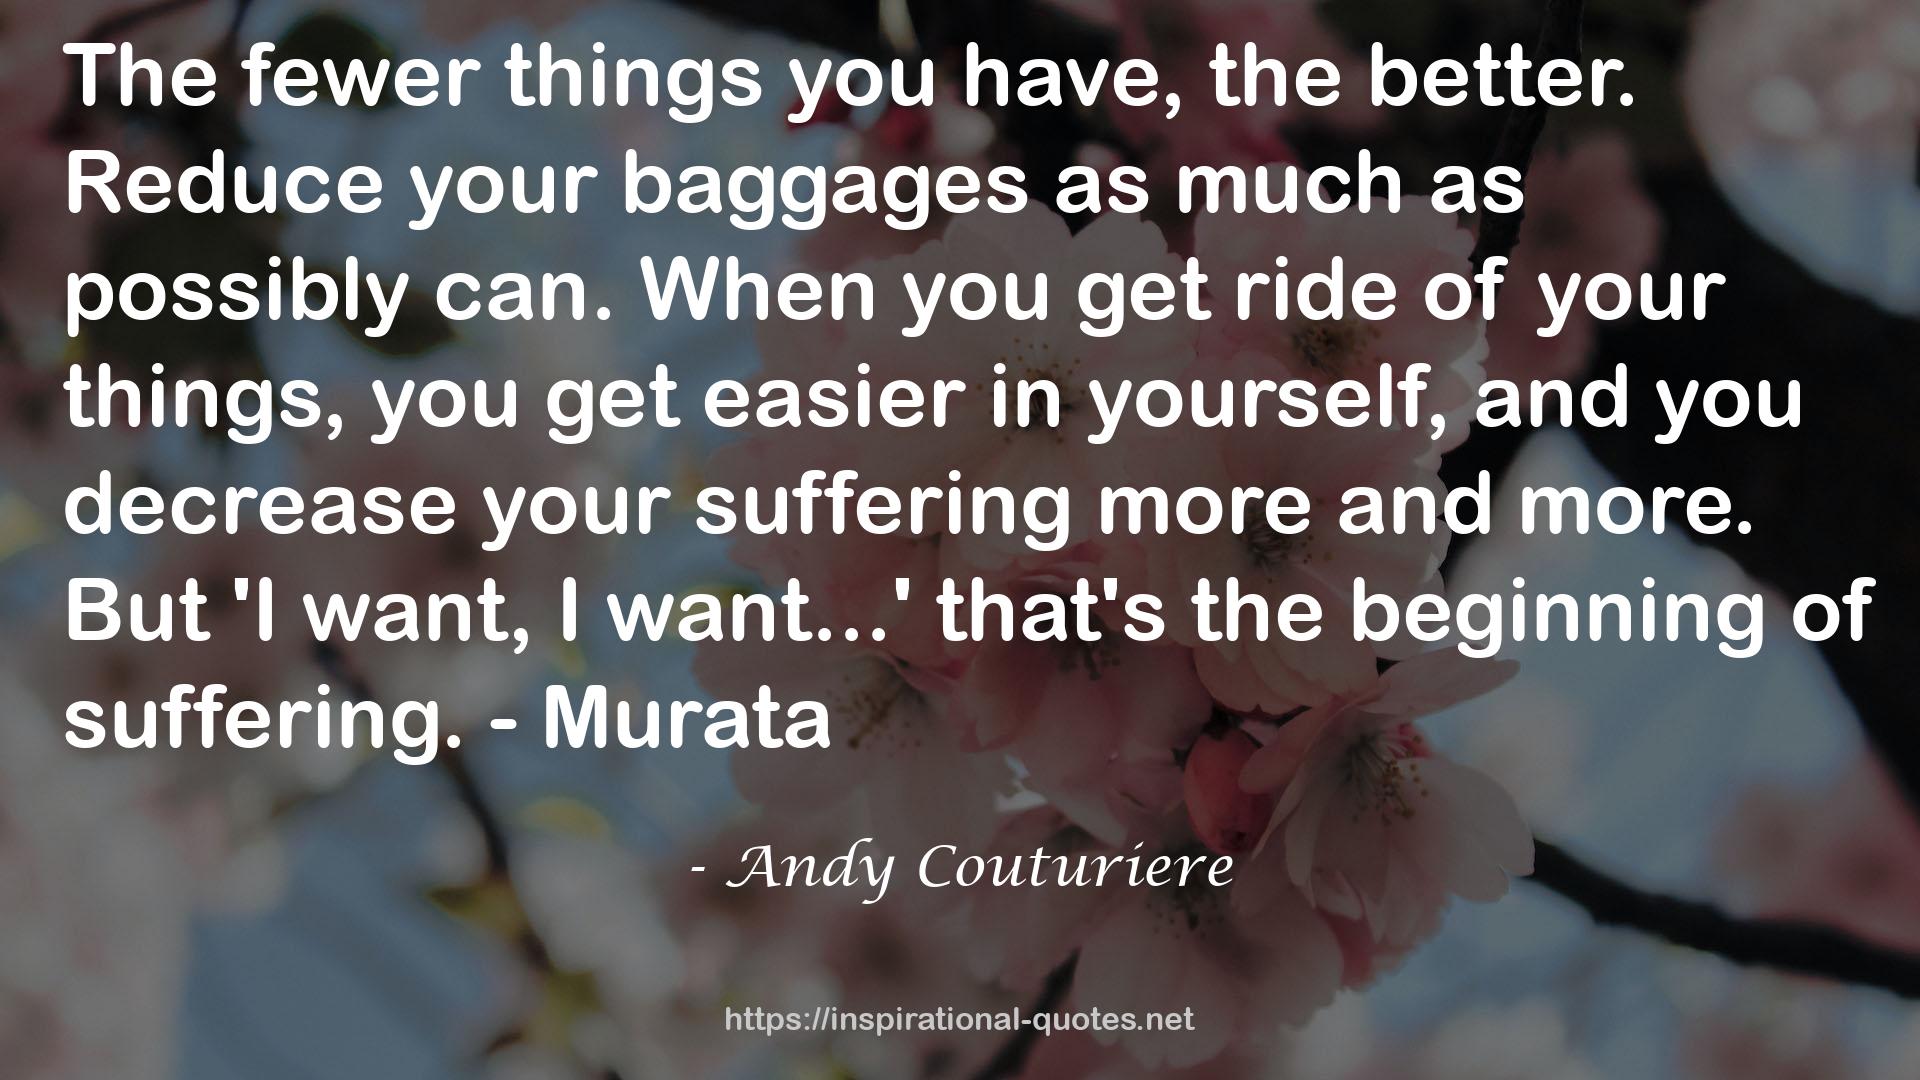 Andy Couturiere QUOTES